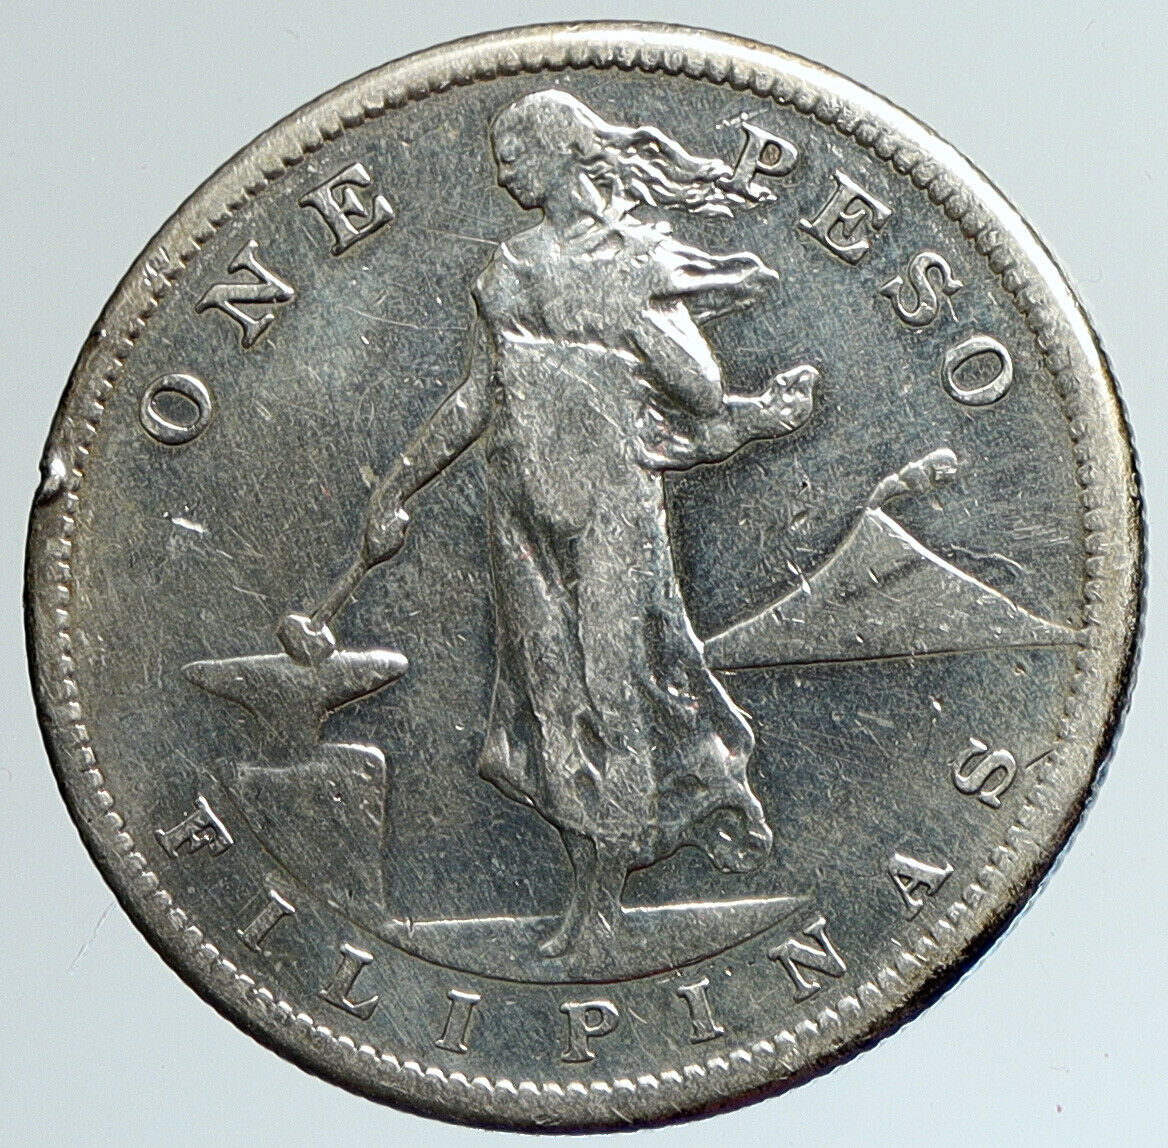 1907 S PHILIPPINES Under US Administration w Eagle OLD Silver PESO Coin i111614